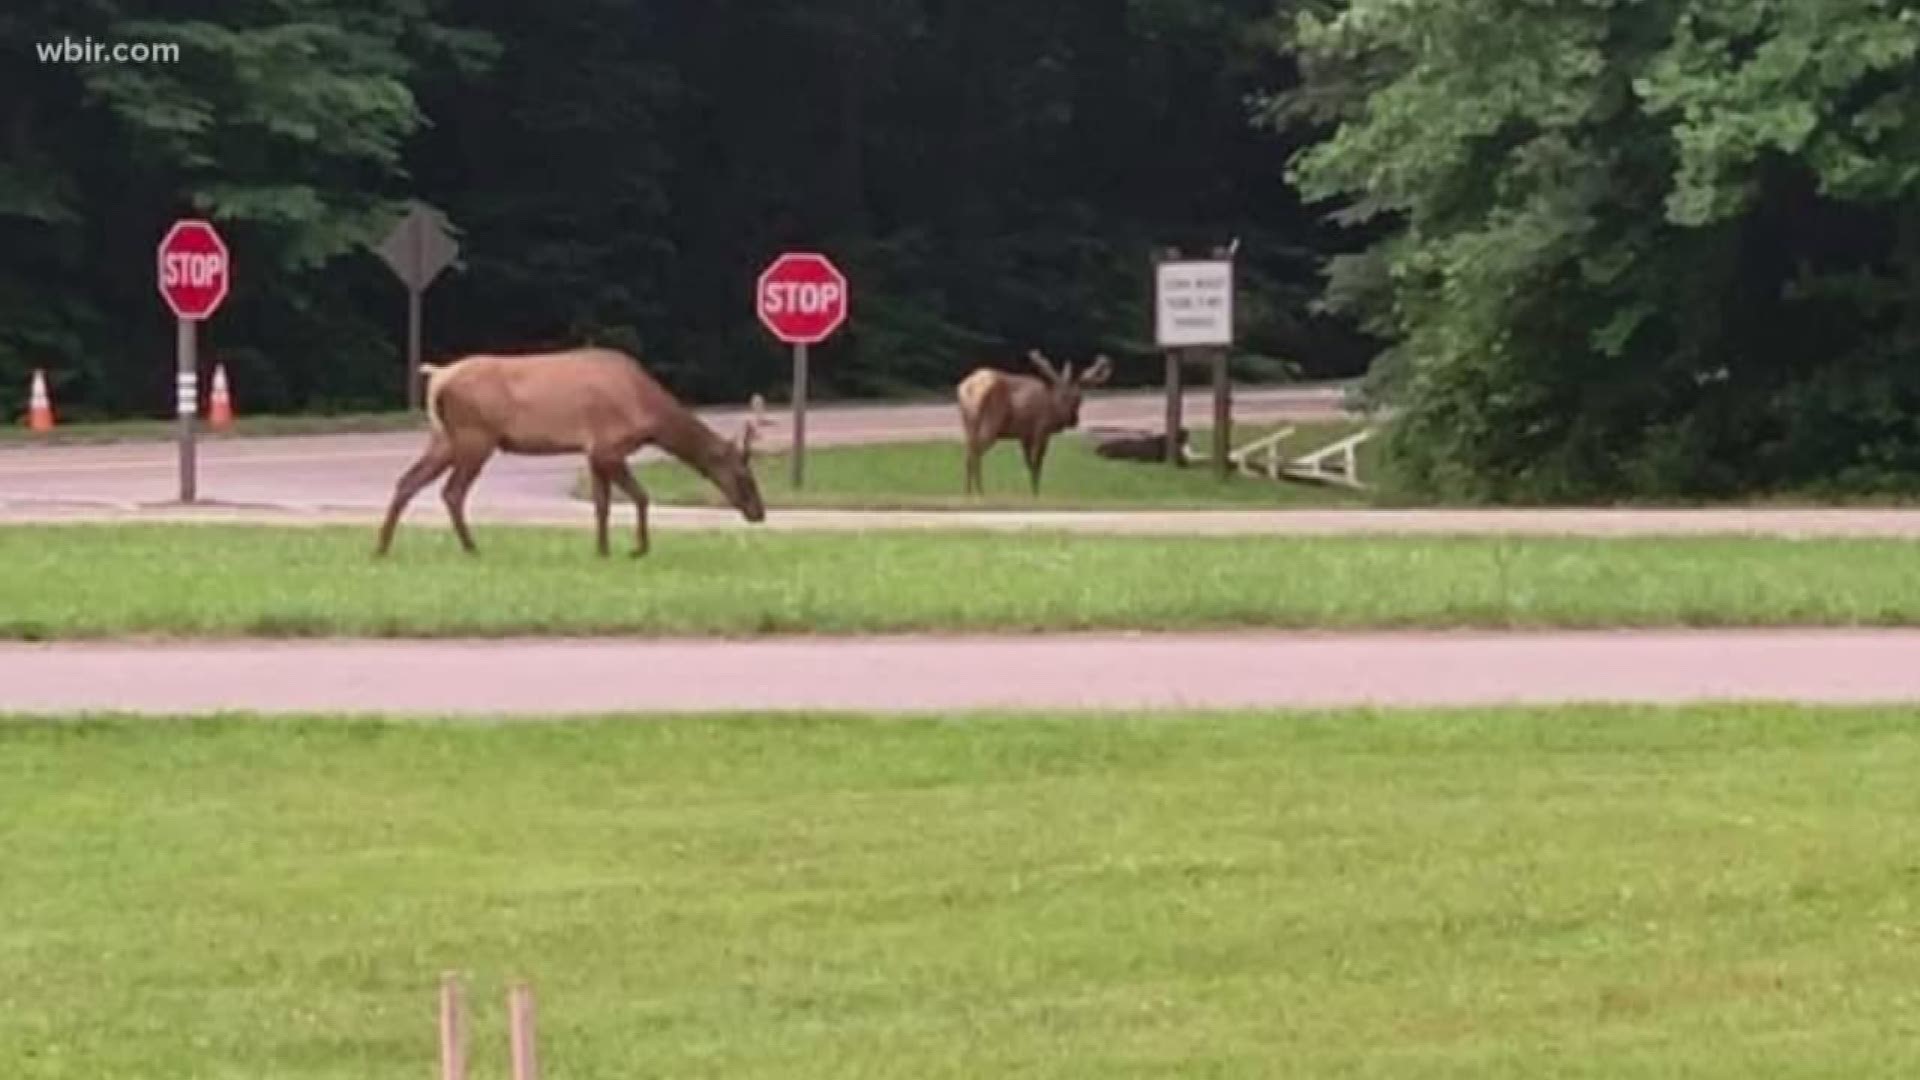 Park biologists are working to keep the elk the road.